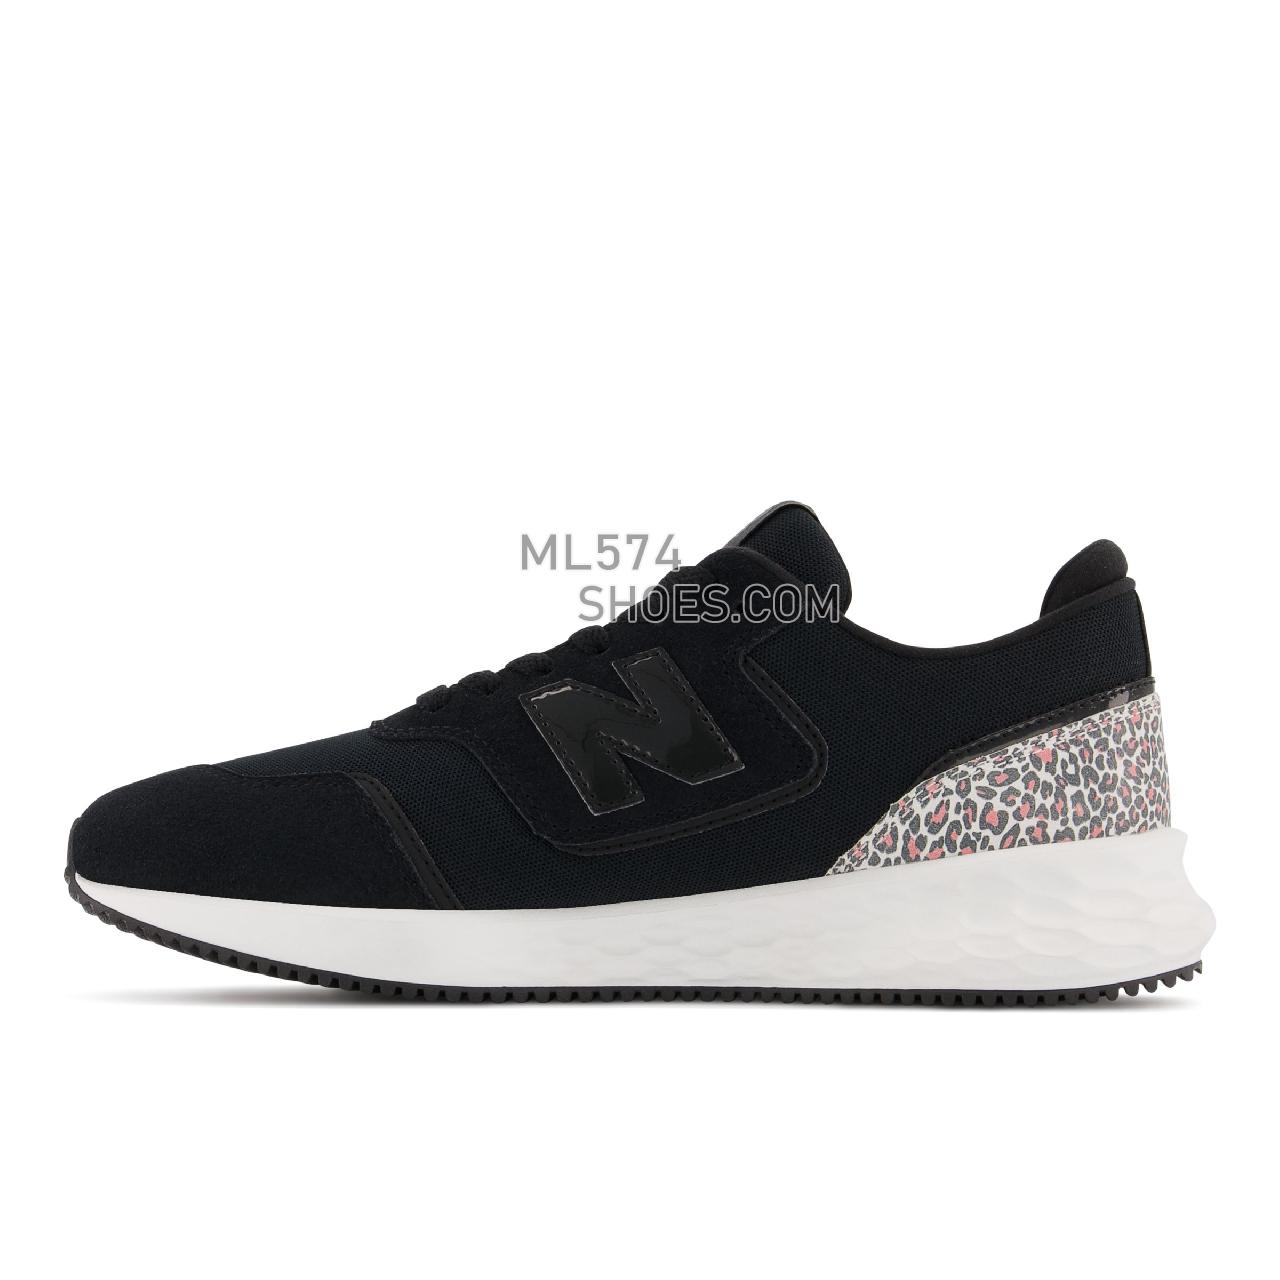 New Balance Fresh Foam X70 - Women's Sport Style Sneakers - Black with Vivid Coral and White - WSX70BL1